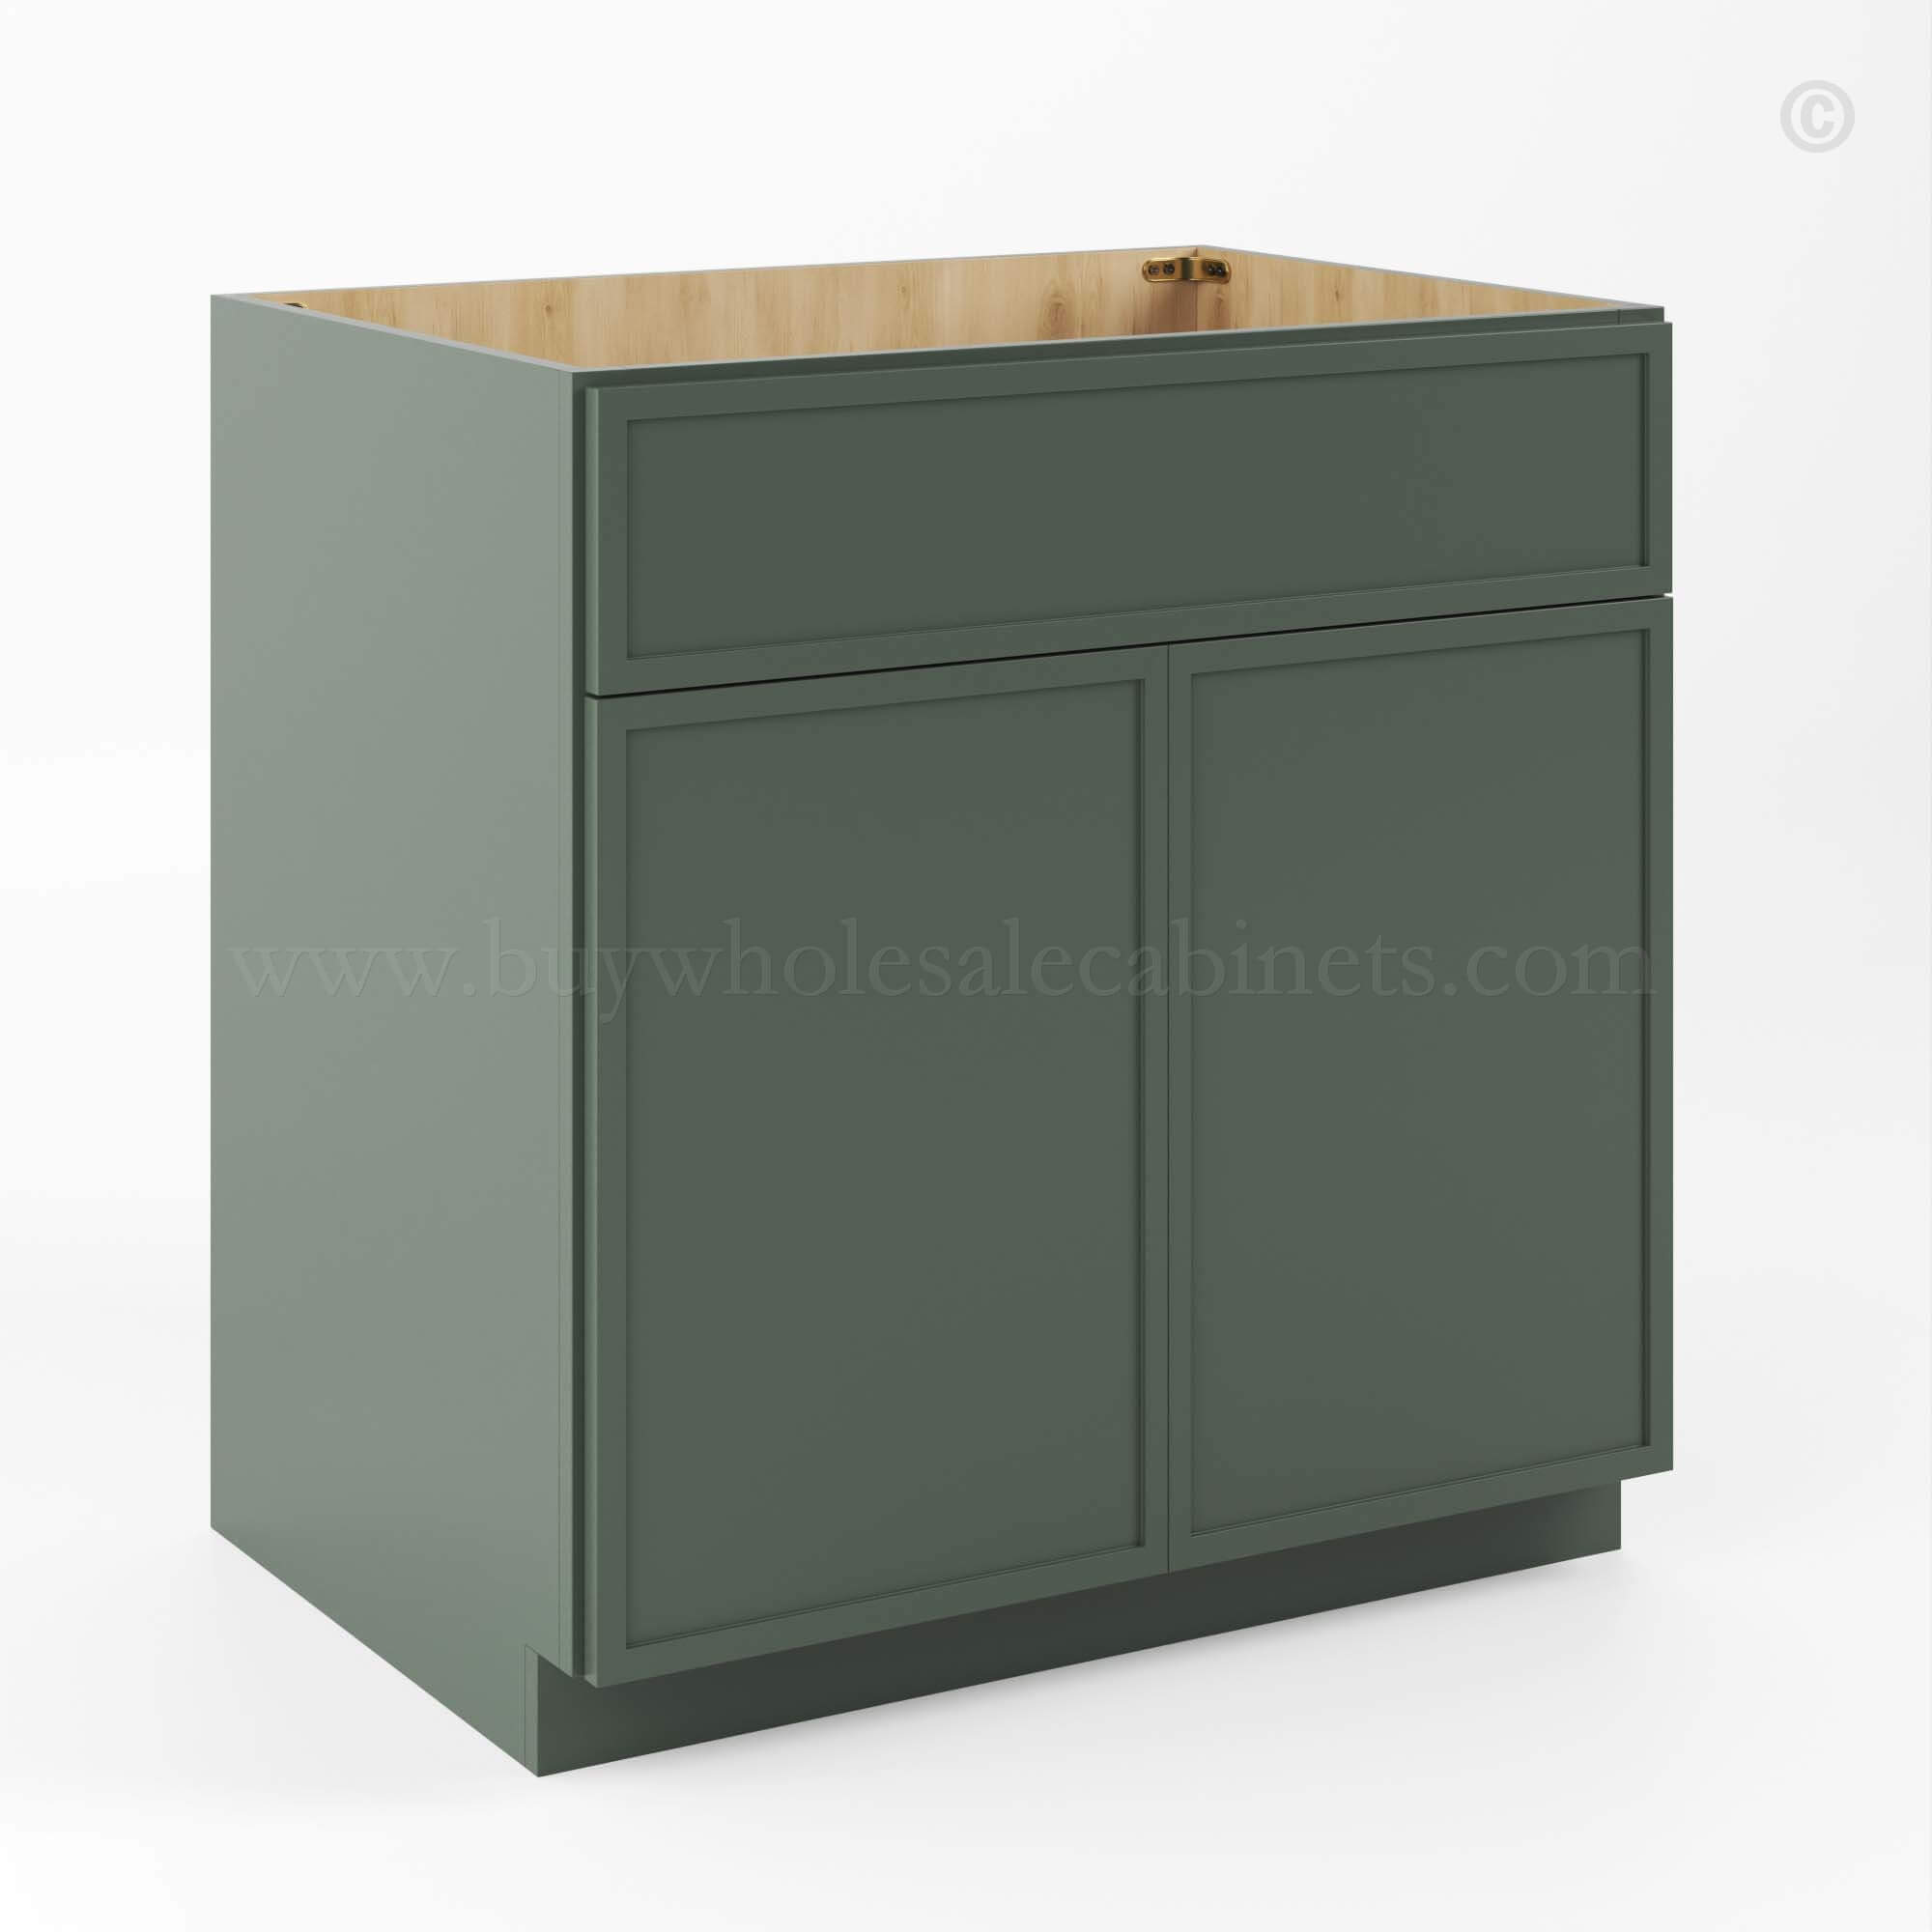 Slim Shaker Green Sink Base Double Door and 1 False Drawer, rta cabinets, wholesale cabinets